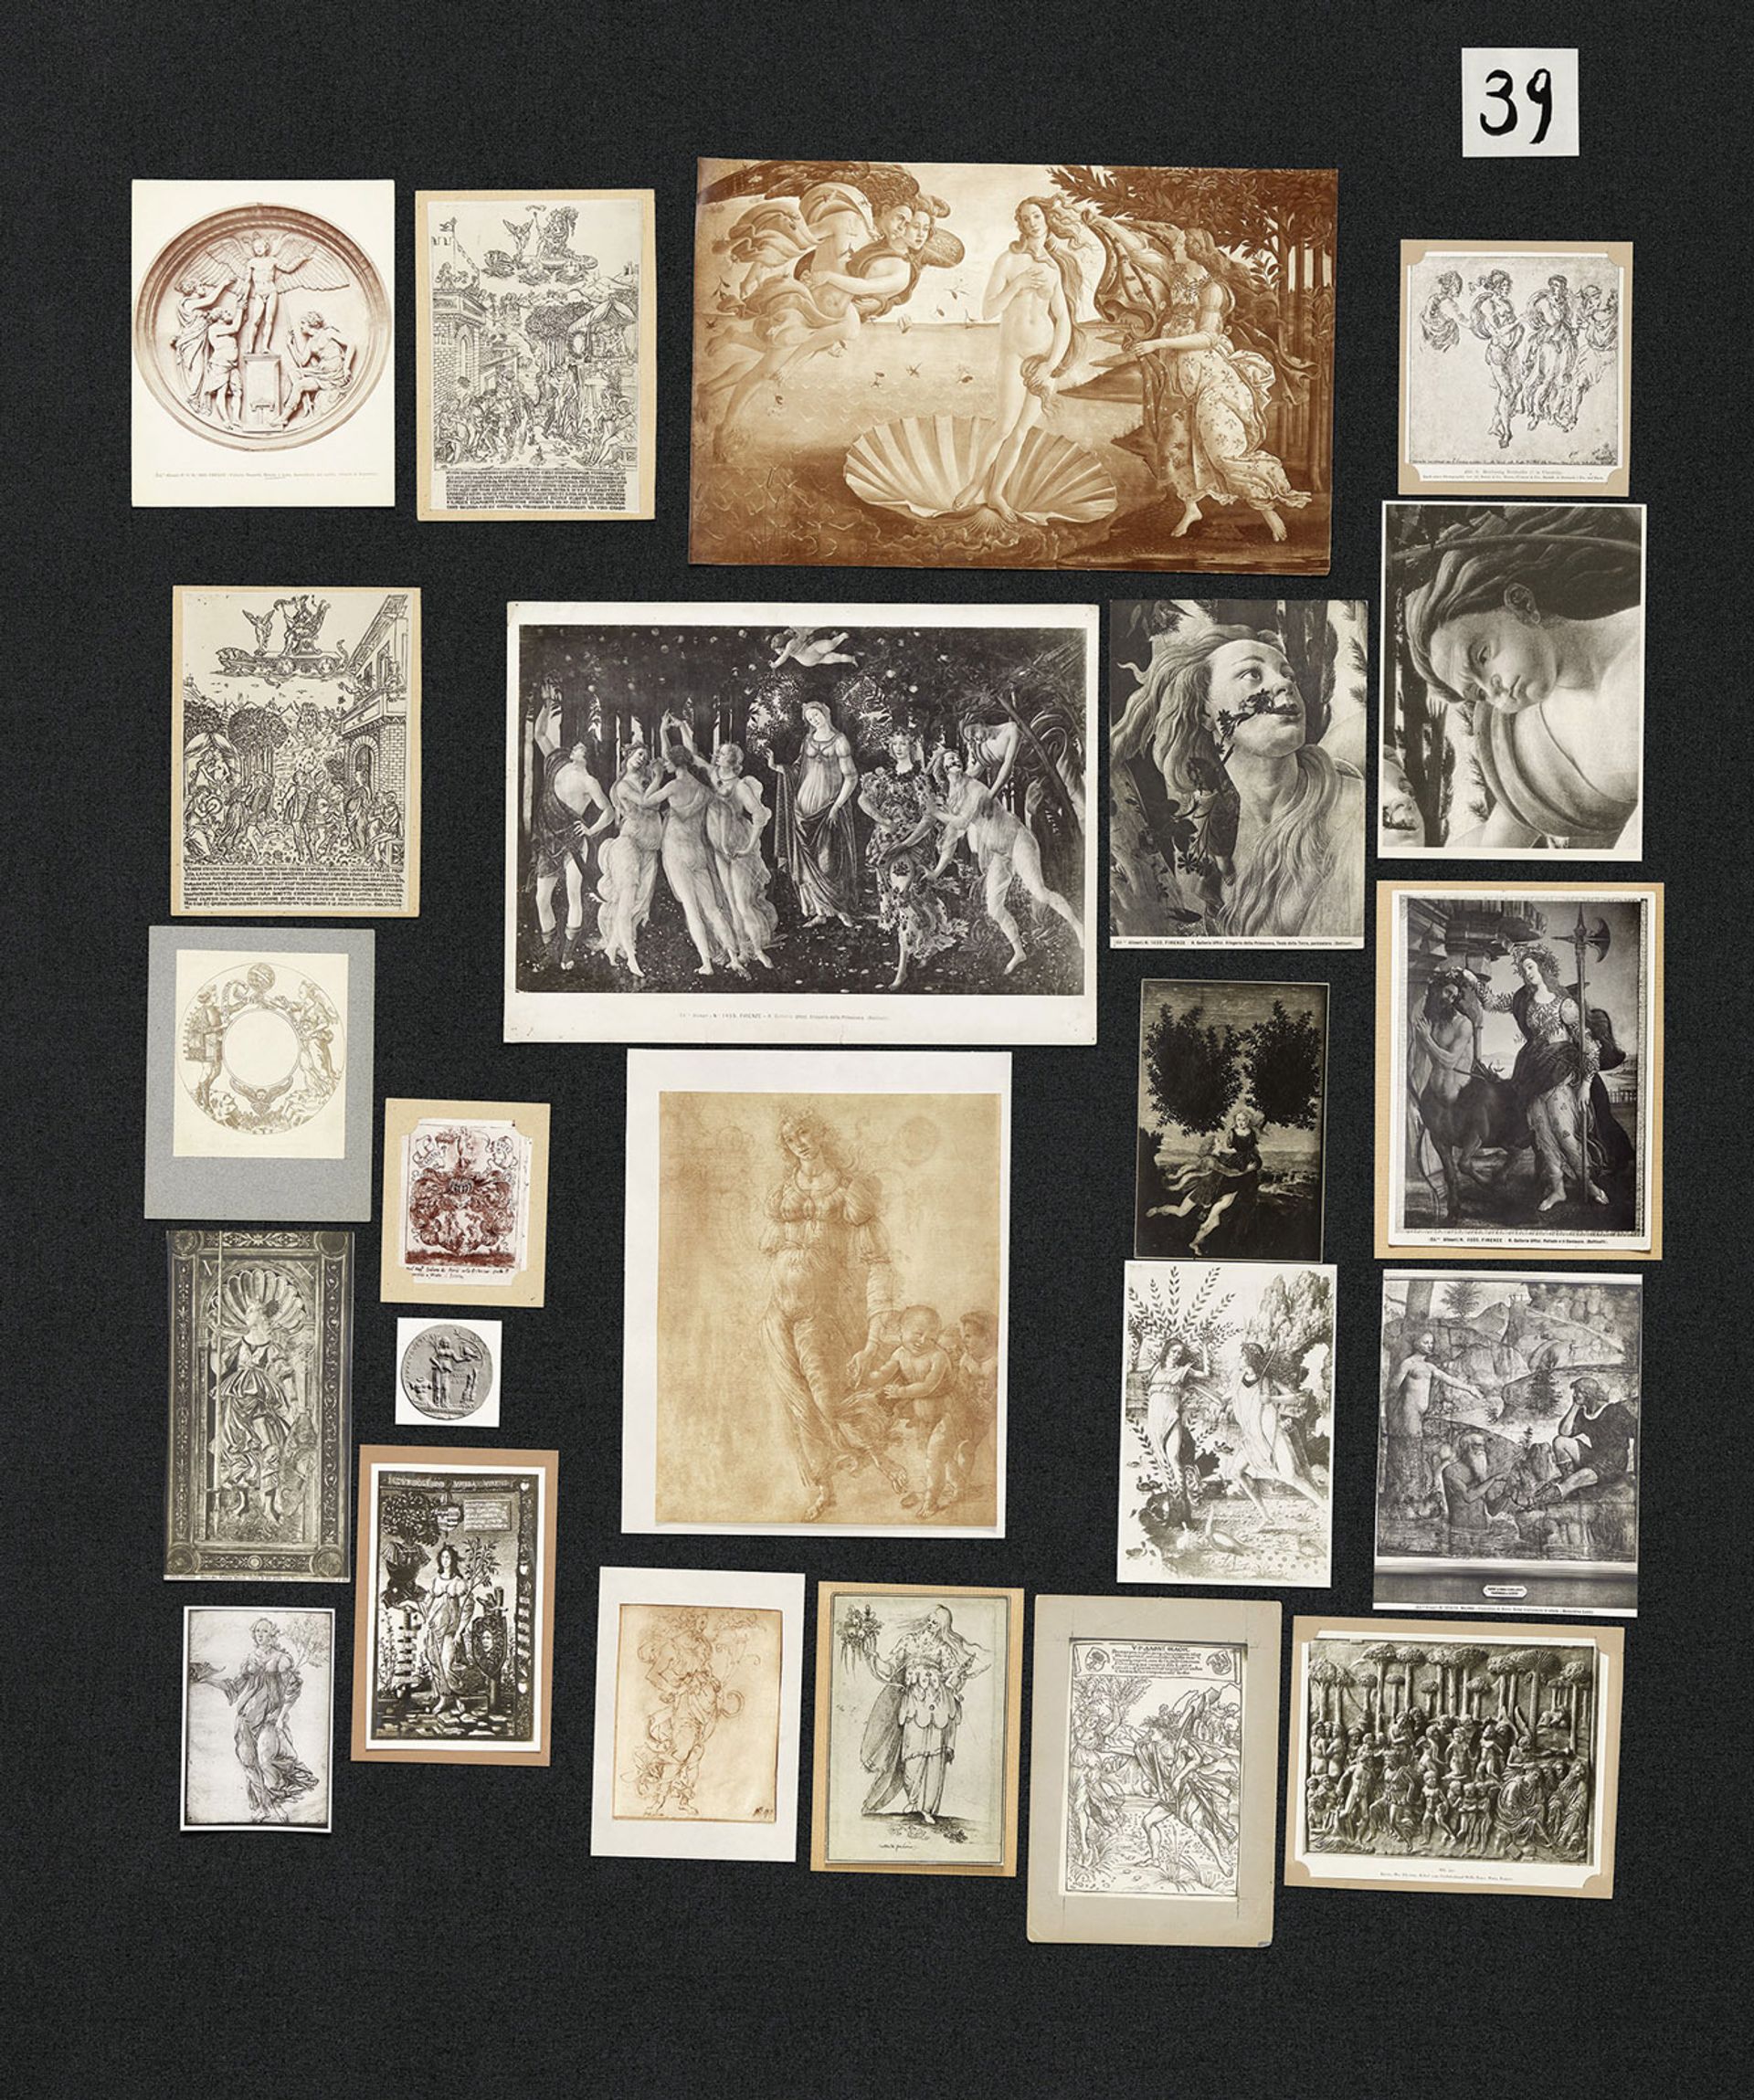 Warburg's Bilderatlas Mnemosyne panel 39. The 63 panels, each measuring 2m by 1.5m, were designed to provide non-linear pathways of meaning between images from antiquity to the early 20th century Photo: Wootton/fluid; Courtesy The Warburg Institute, London